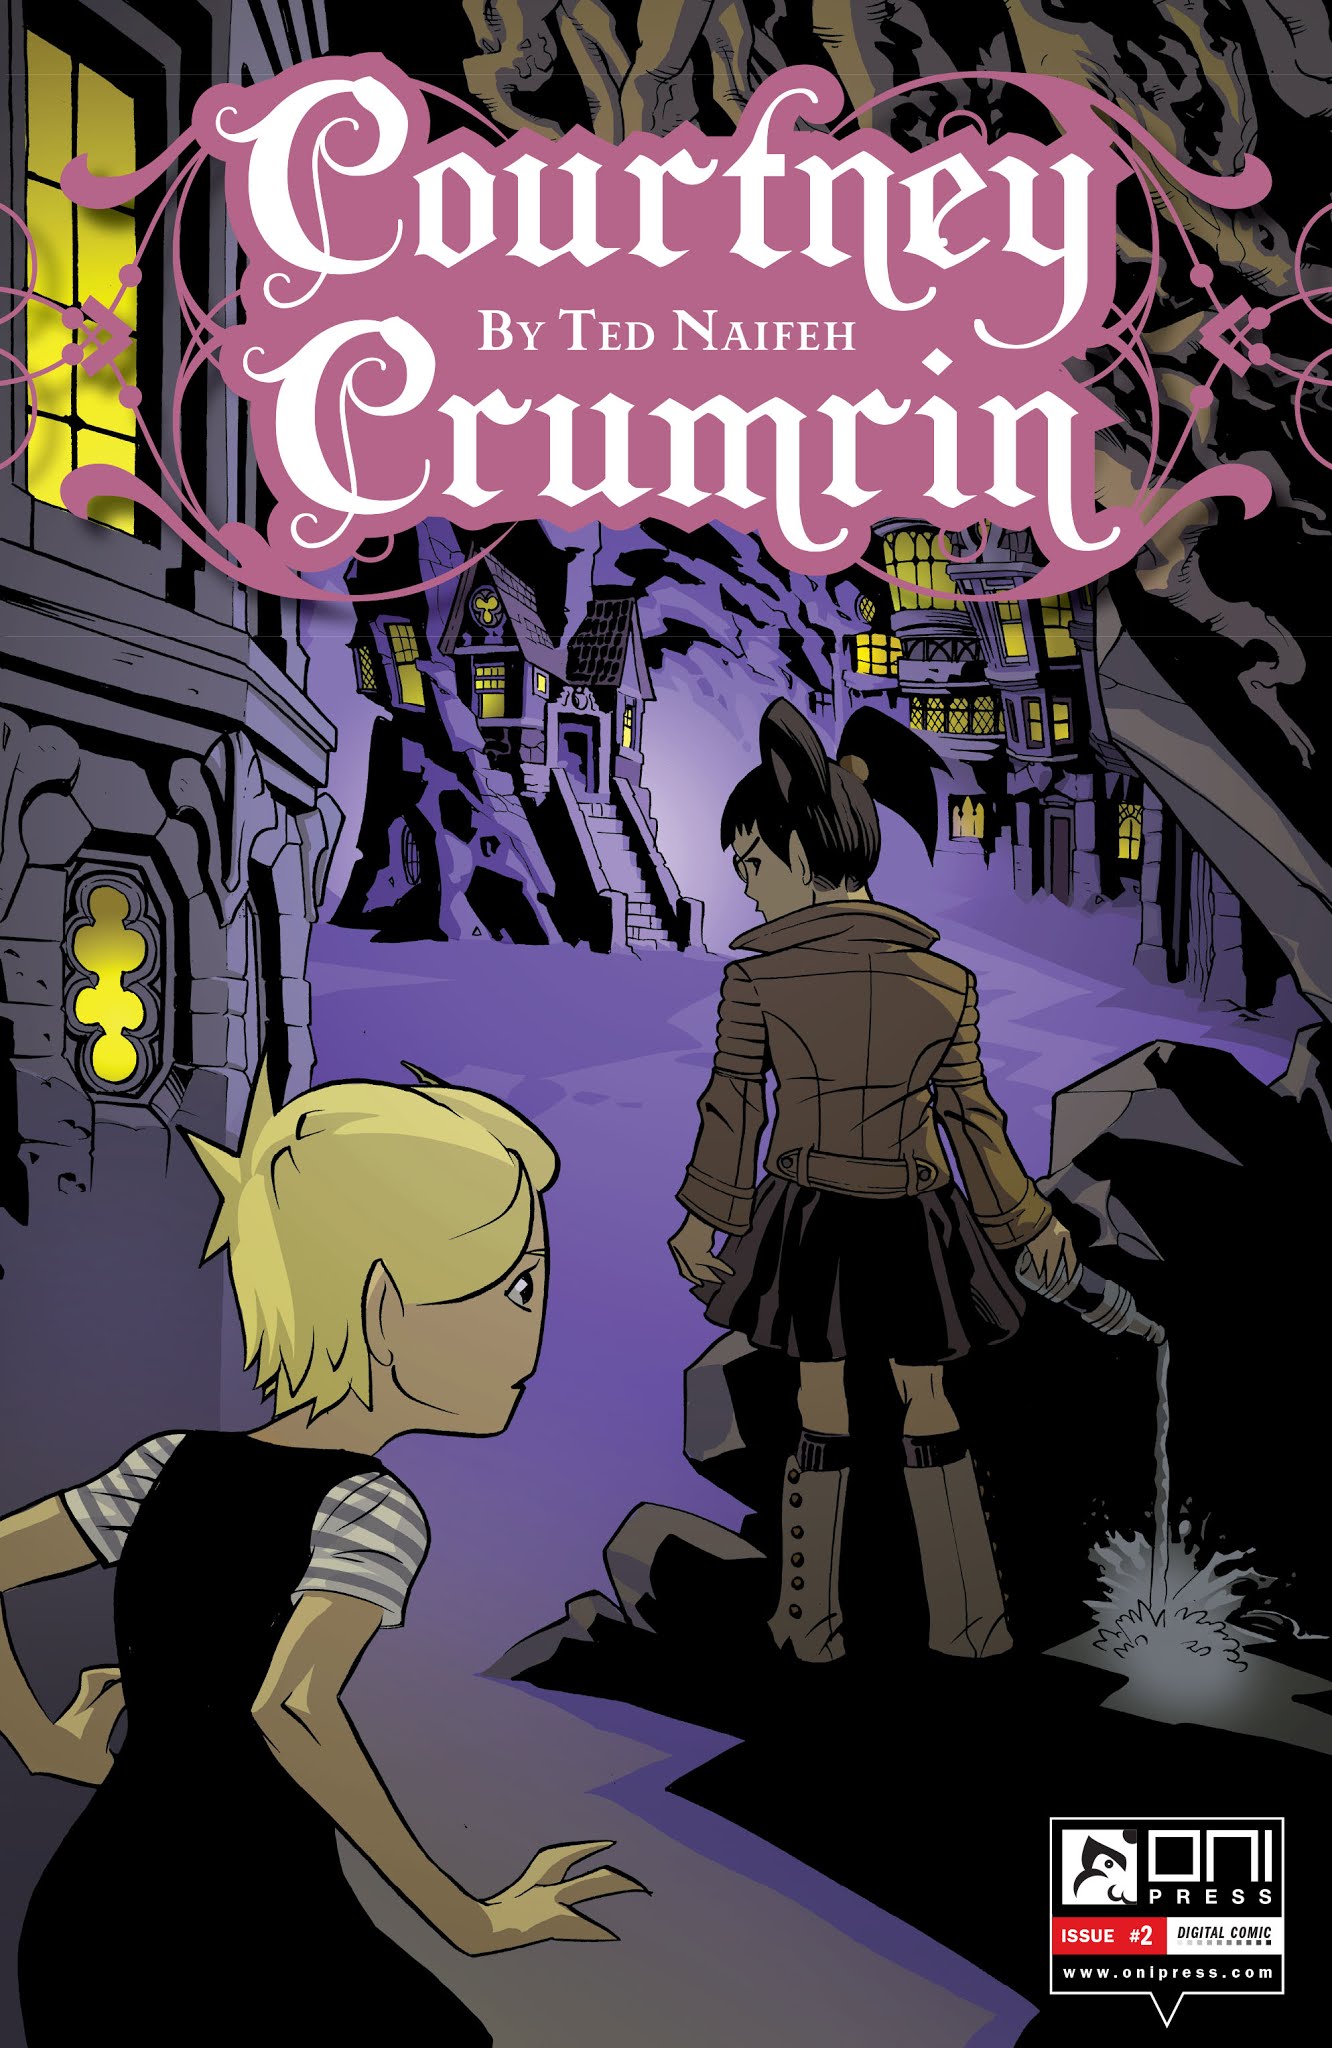 Read online Courtney Crumrin comic -  Issue #2 - 1